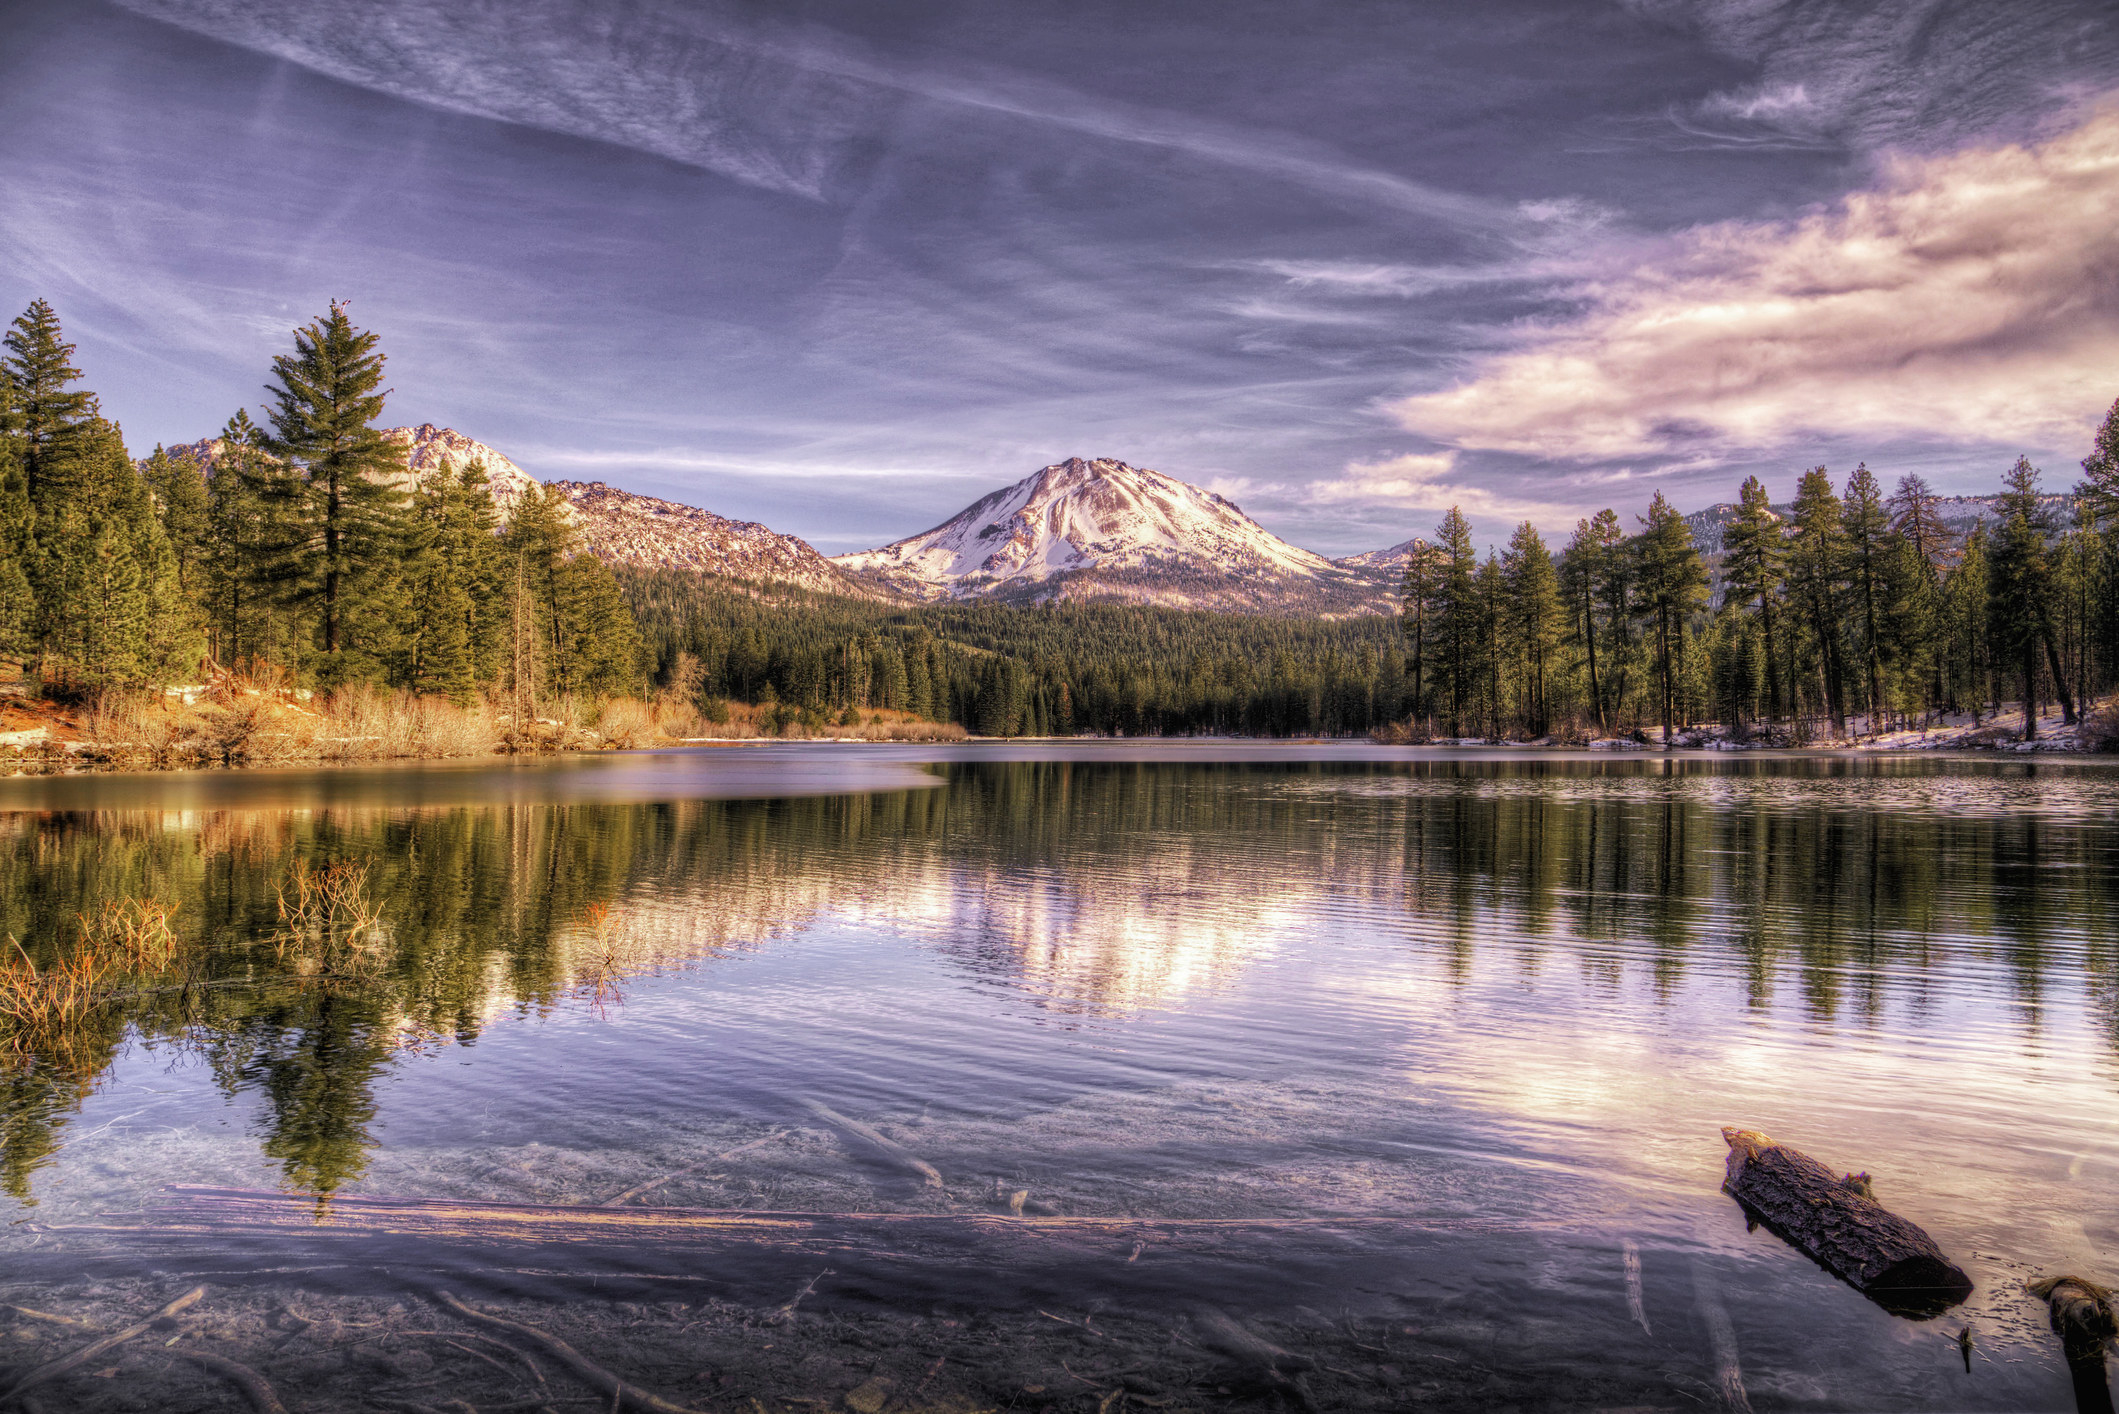 A snowy mountain peak and a glassy lake surrounded by trees in Lassen Volcanic National Park.